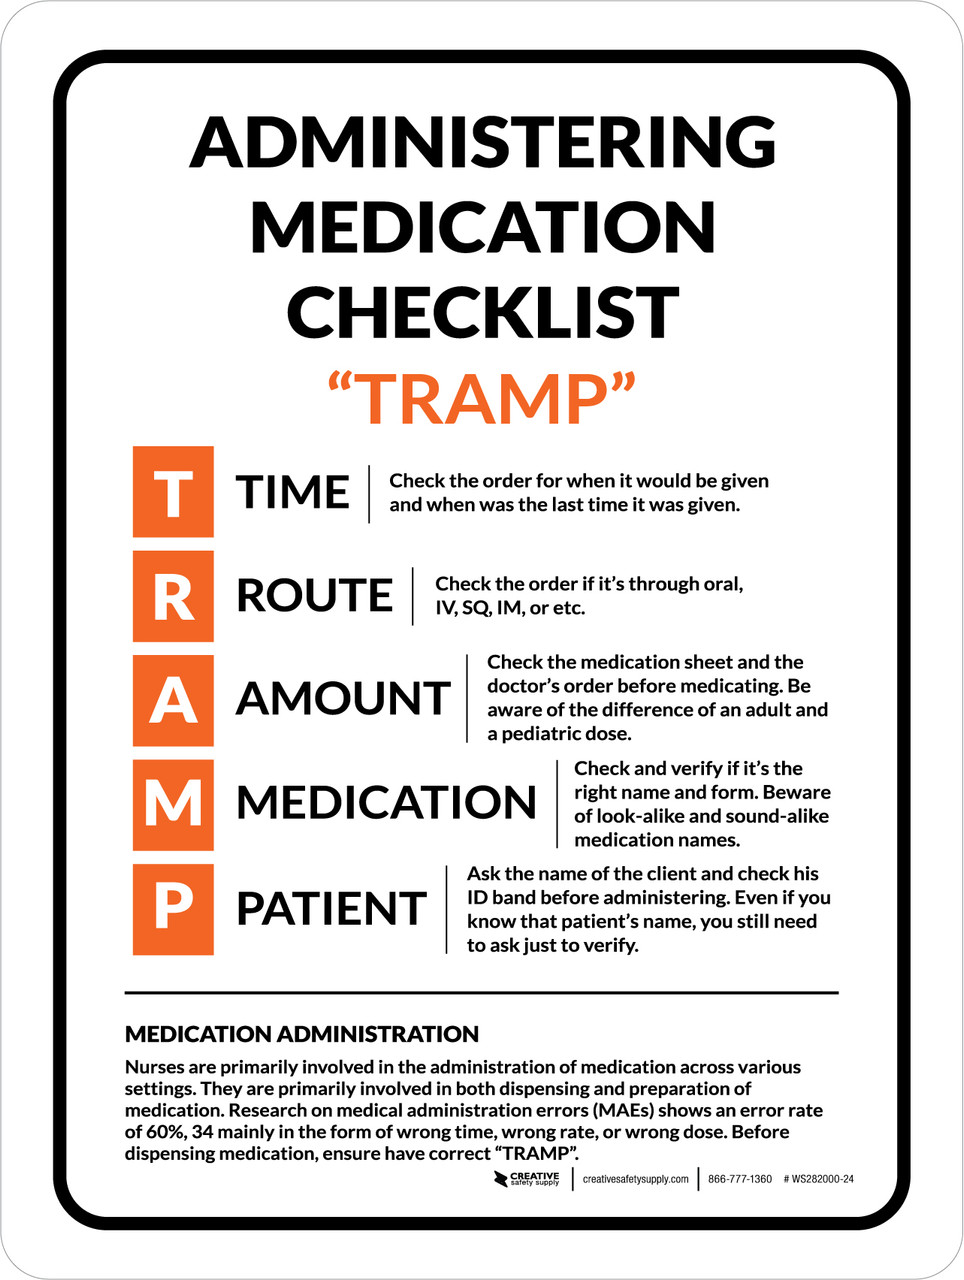 The medication administration cross-check© procedure. From The